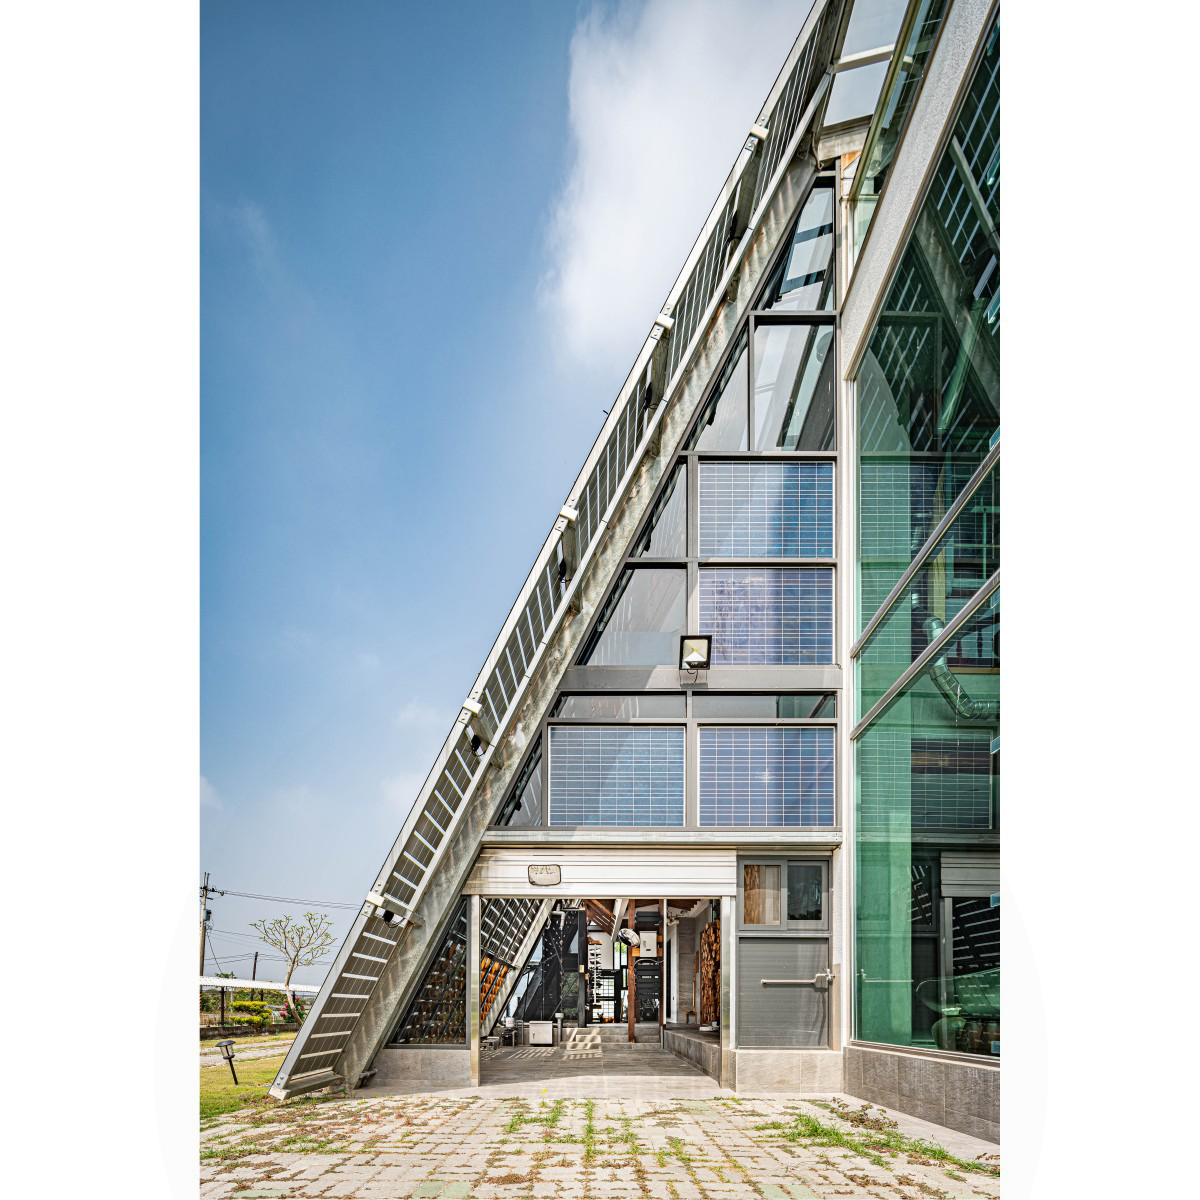 SunEdge PV Technology Co., Ltd wins Golden at the prestigious A' Sustainable Products, Projects and Green Design Award with The Sun House Sustainable Social Building.